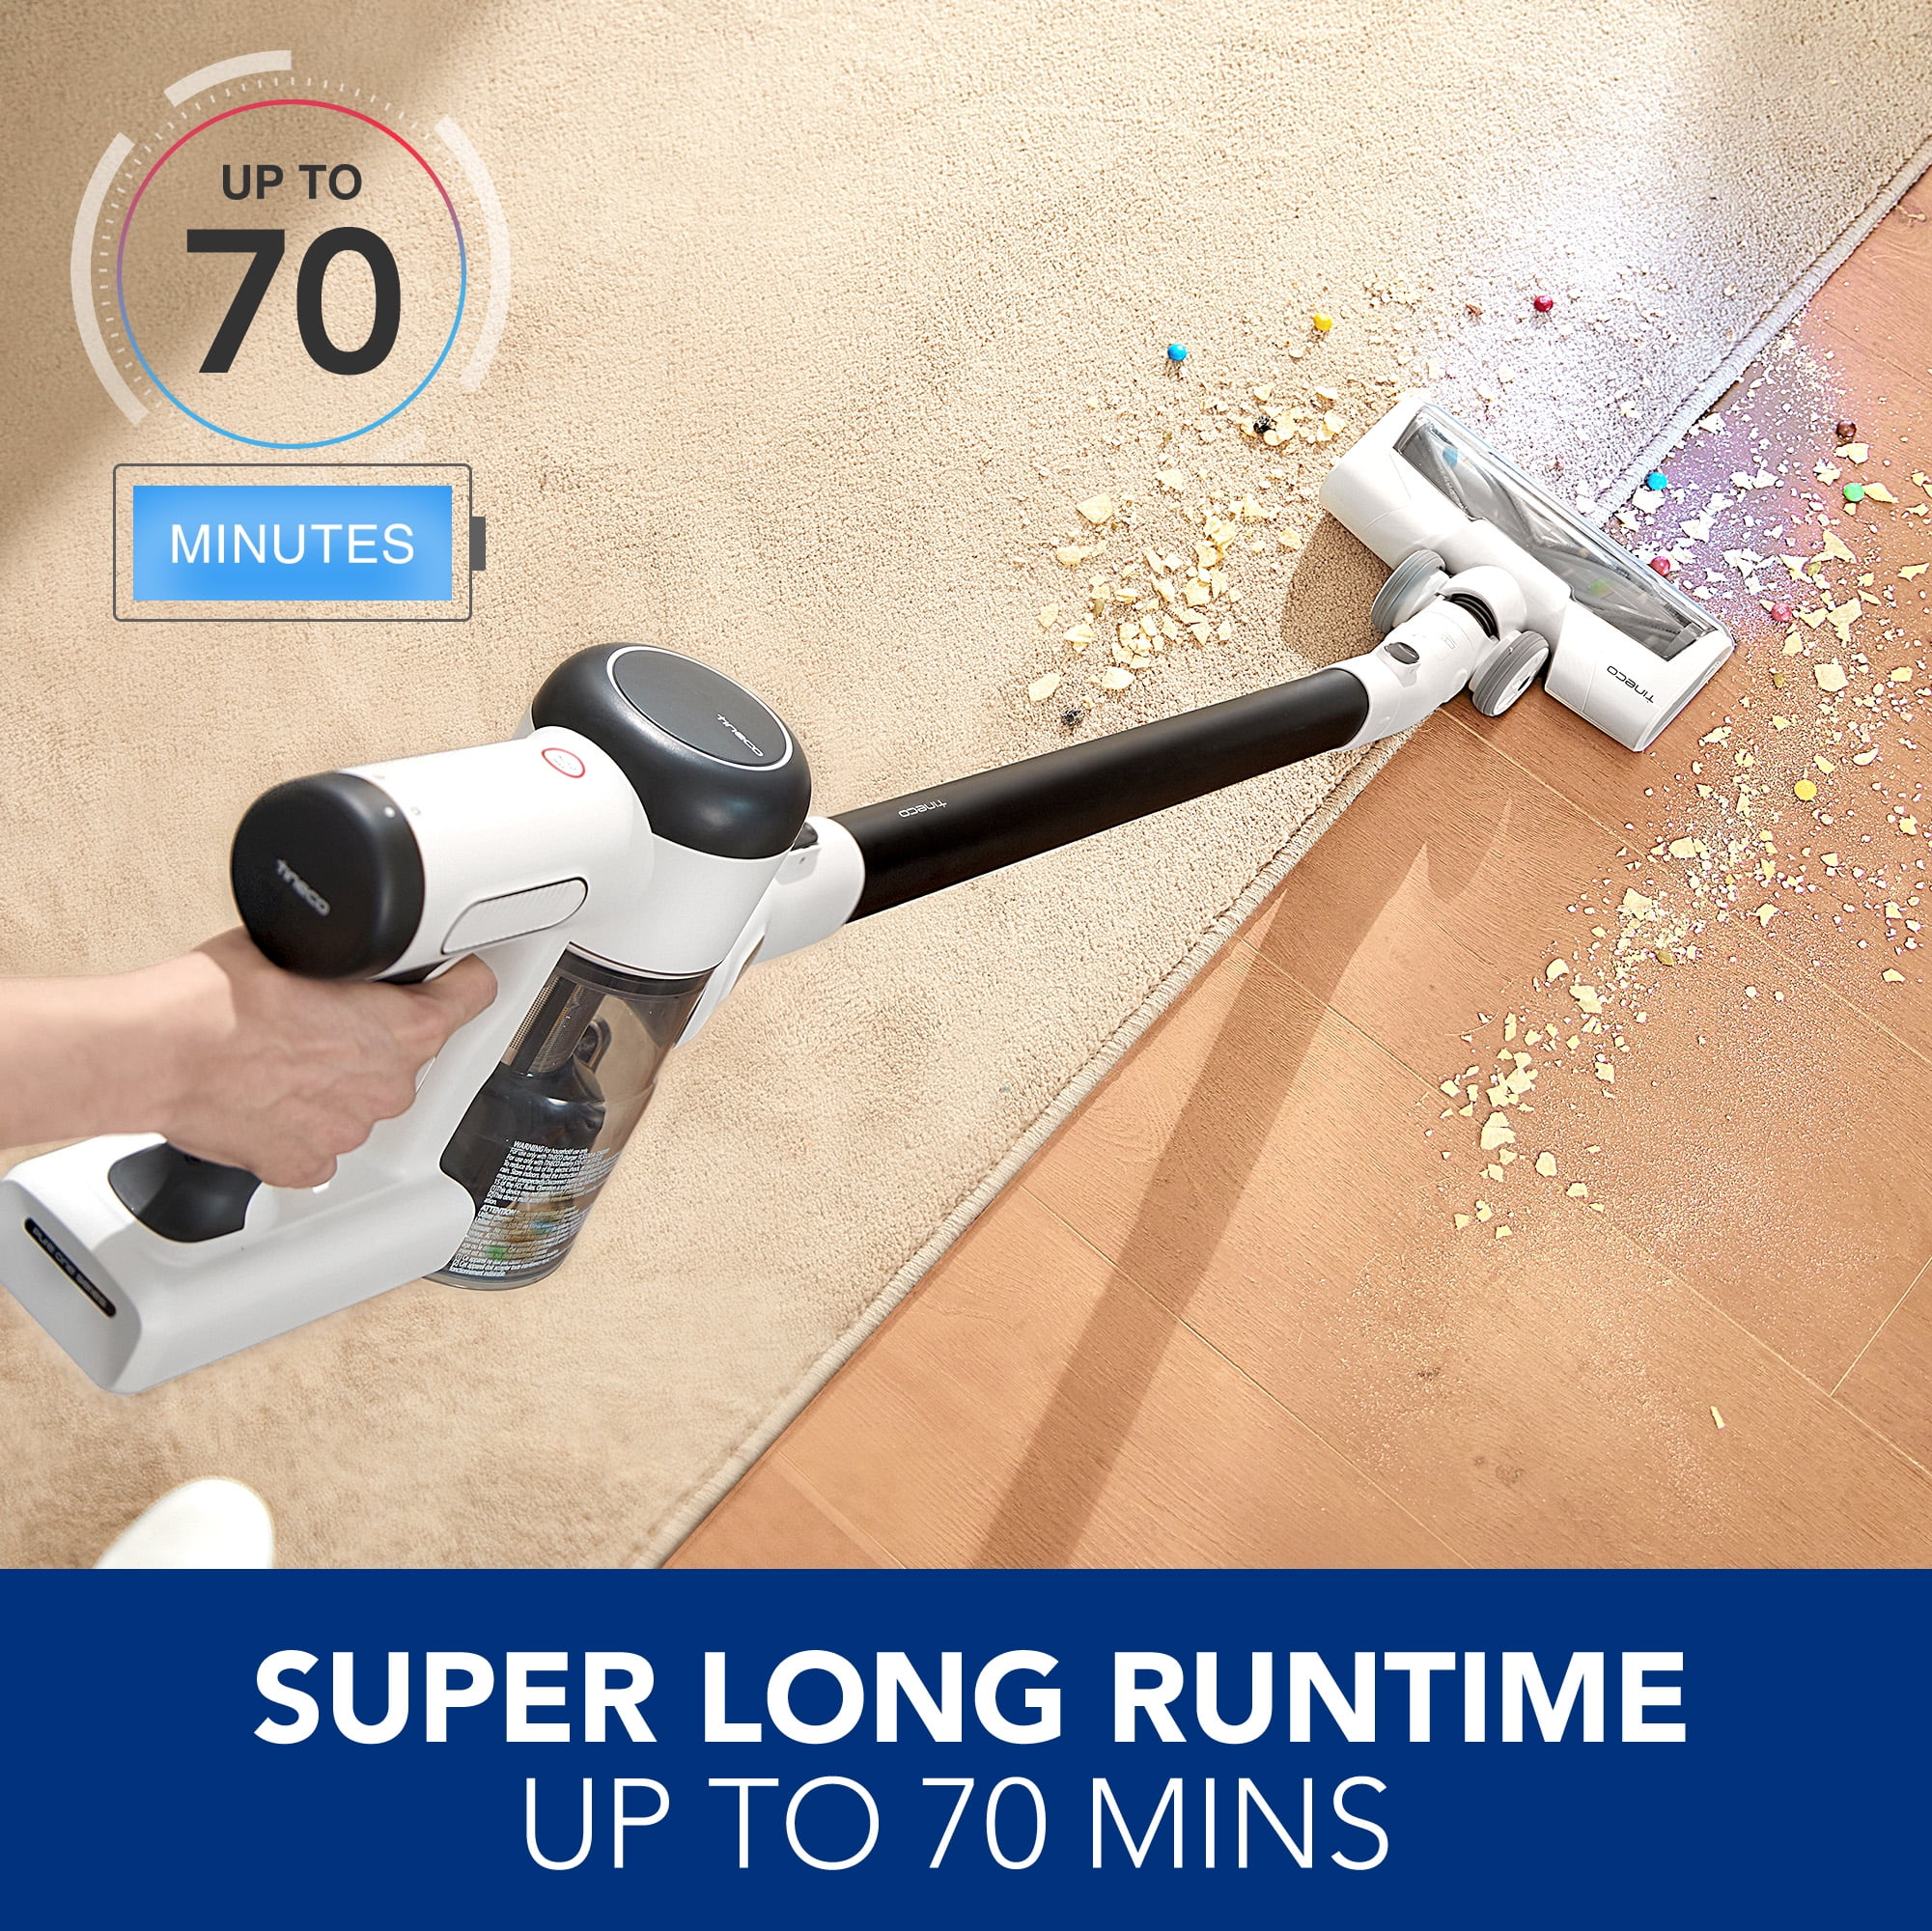 Tineco Pure One X Smart Lightweight Cordless Stick Vacuum Cleaner with  Extra-Long Runtime